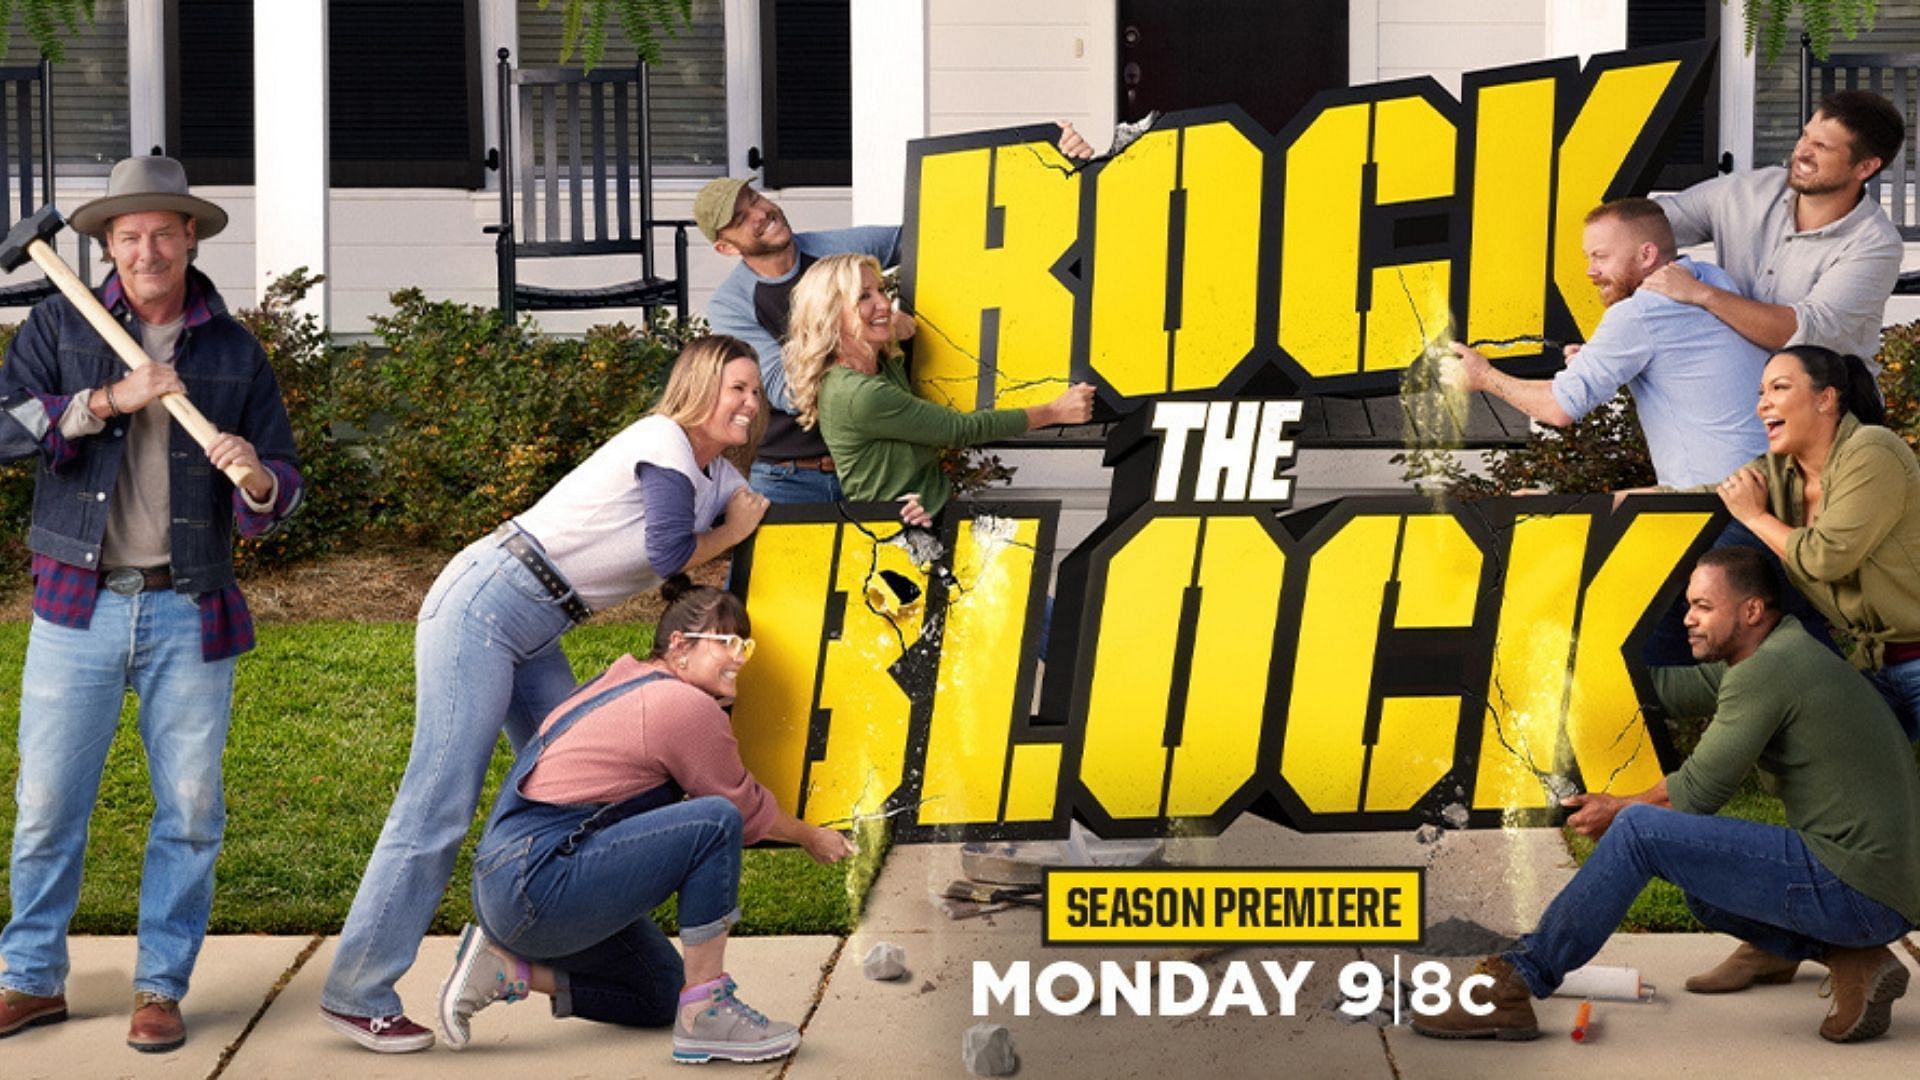 A new challenge awaits for the contestants in an all new episode of Rock The Block (Image via @hgtv/Twitter)